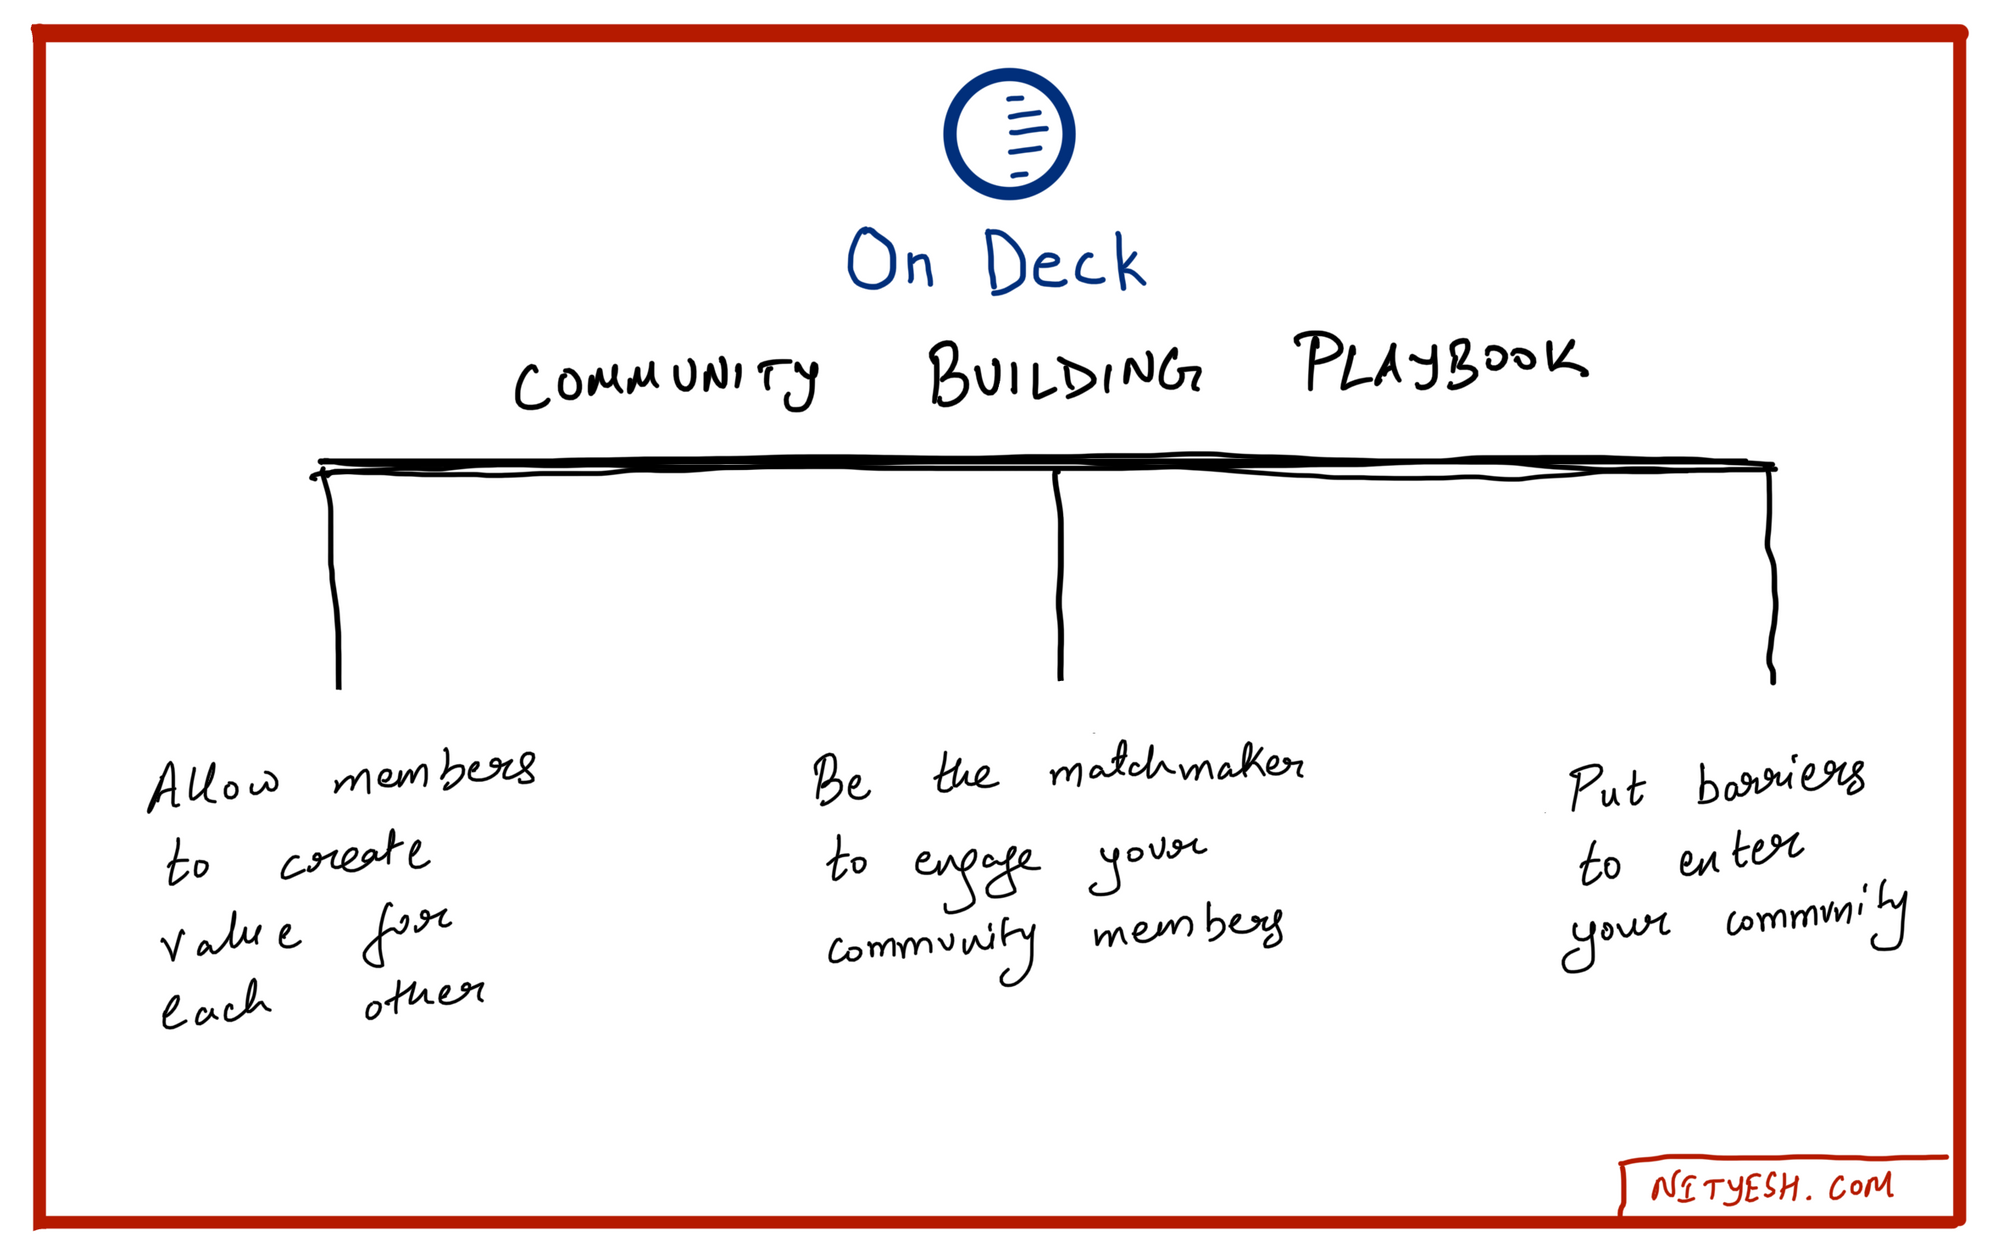 3 Pillars of On Deck's Community Building Playbook - that you can use in your own community